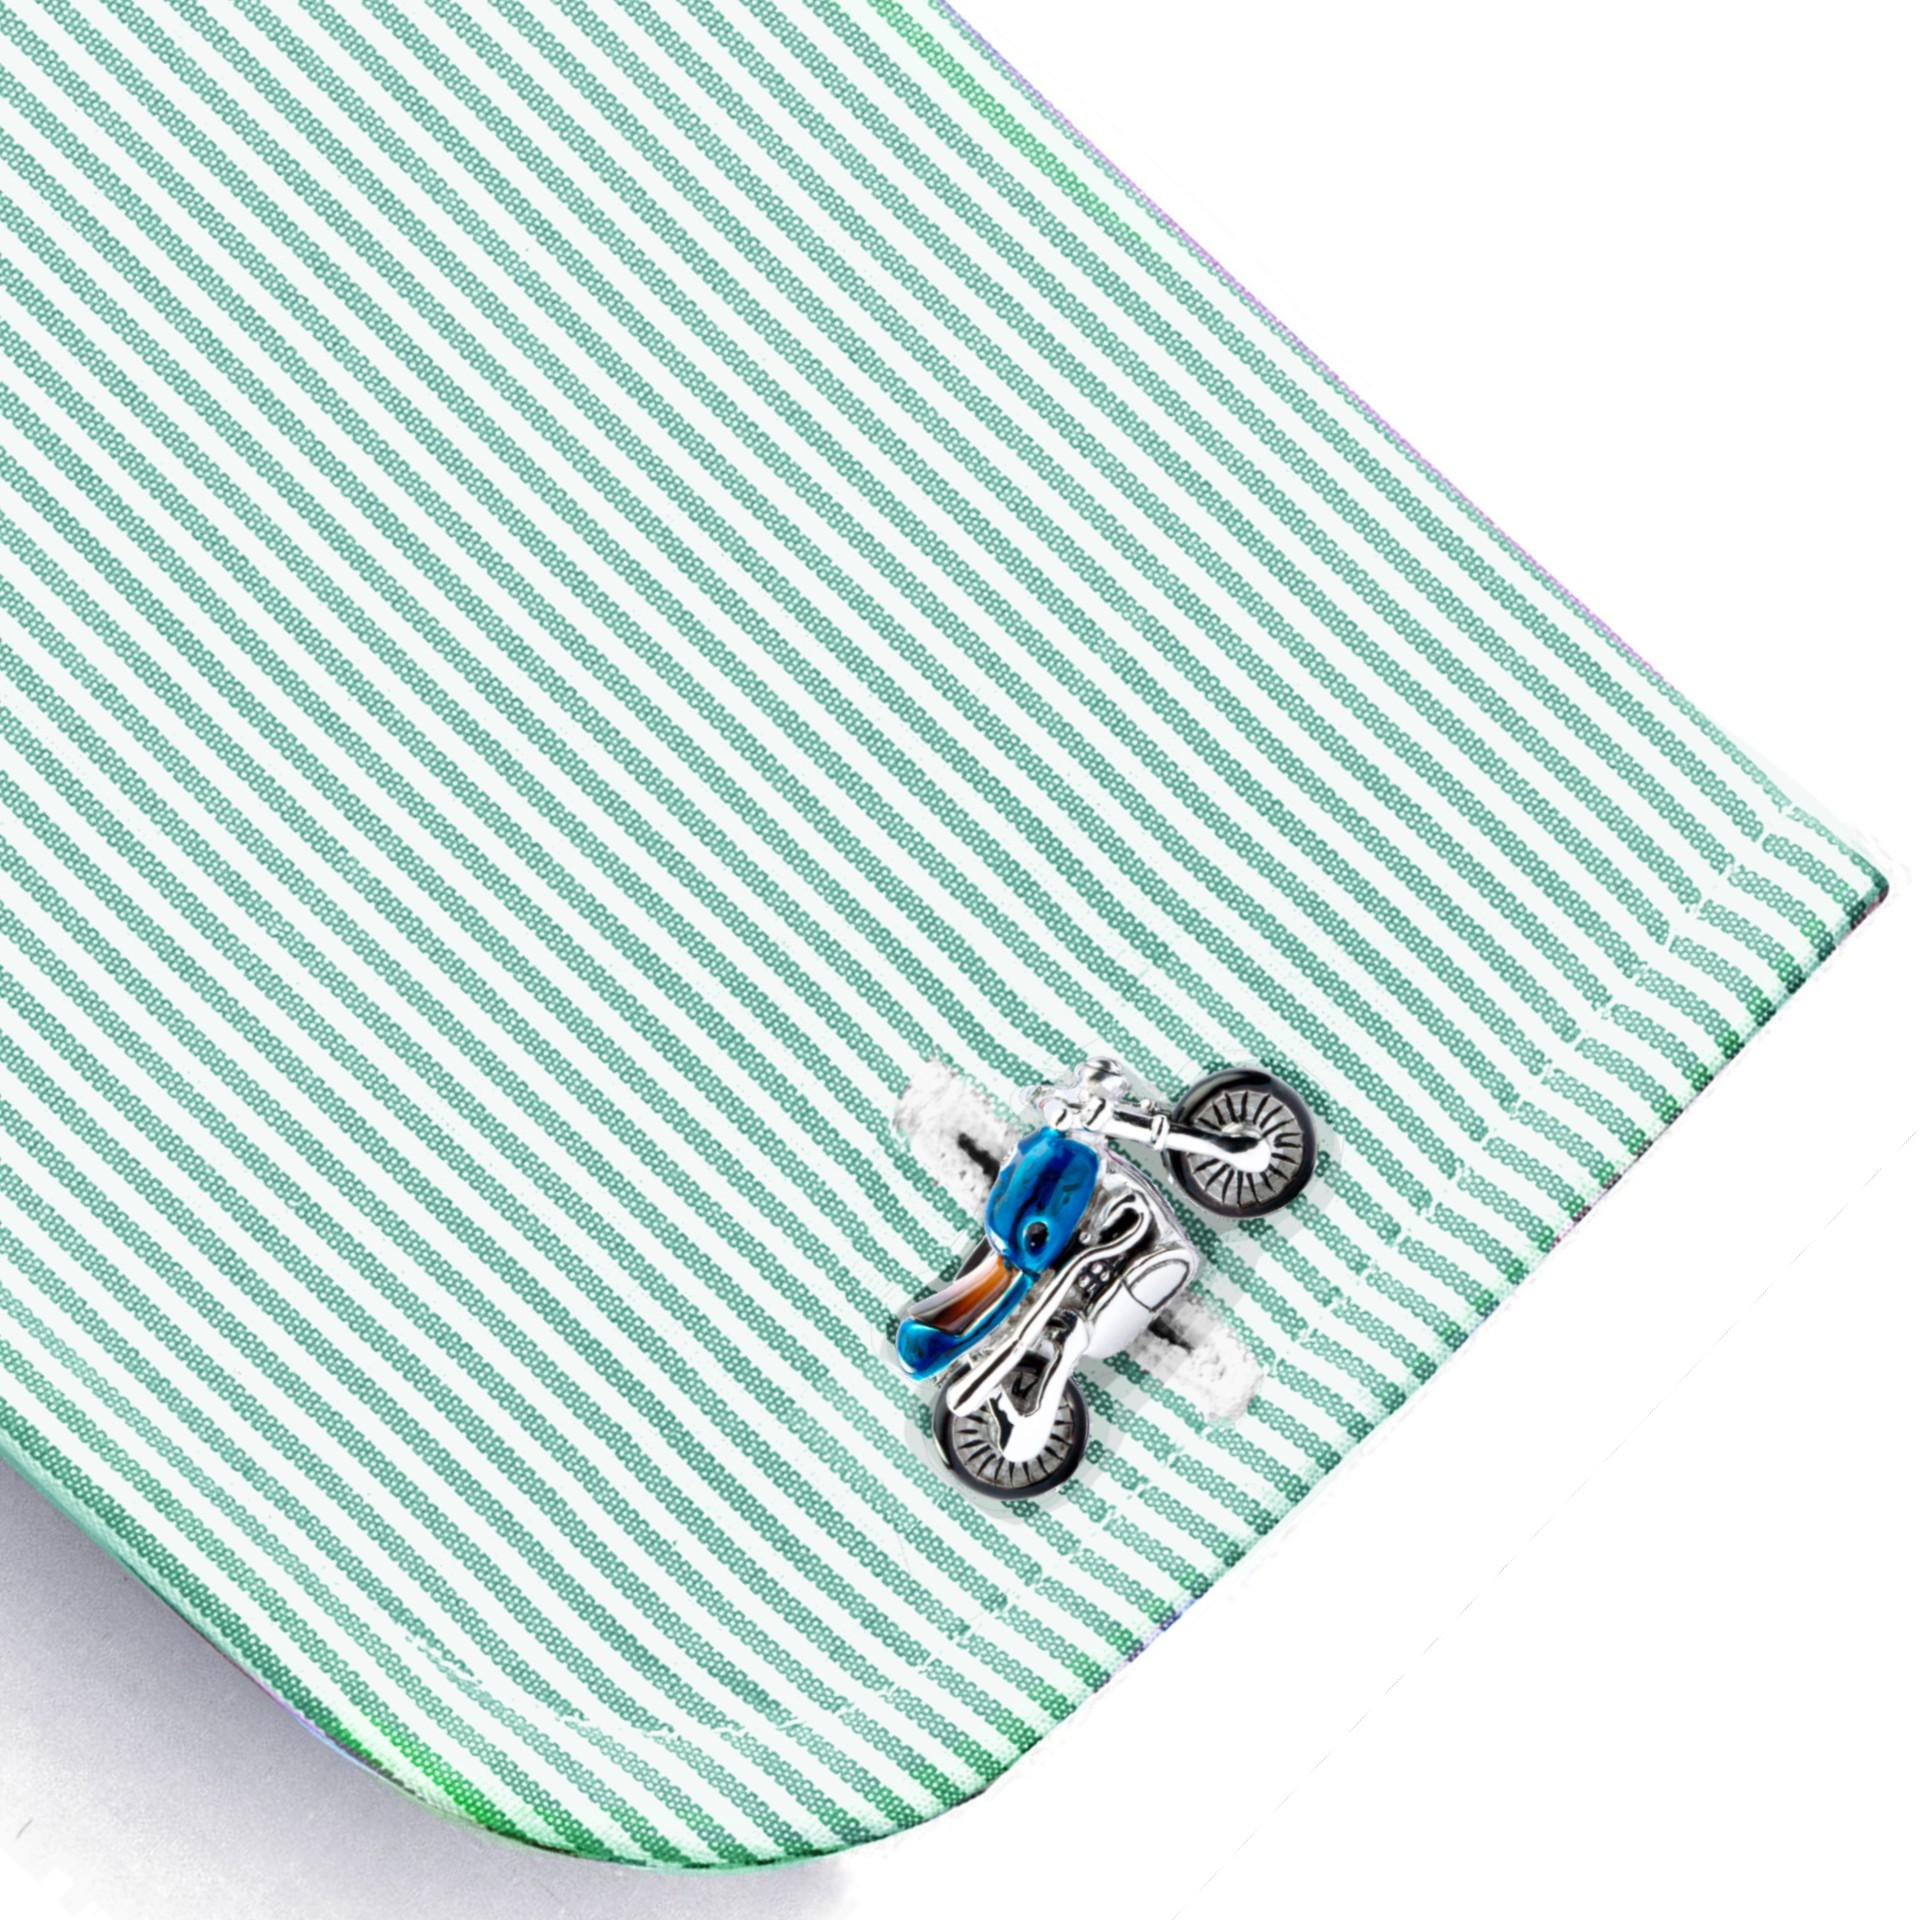 Alex Jona design collection, hand crafted in Italy, sterling silver, blue enamel motorcycle cufflinks. 
Dimensions 0.95 in W x 0.52 in H

Alex Jona cufflinks stand out, not only for their special design and for the excellent quality, but also for